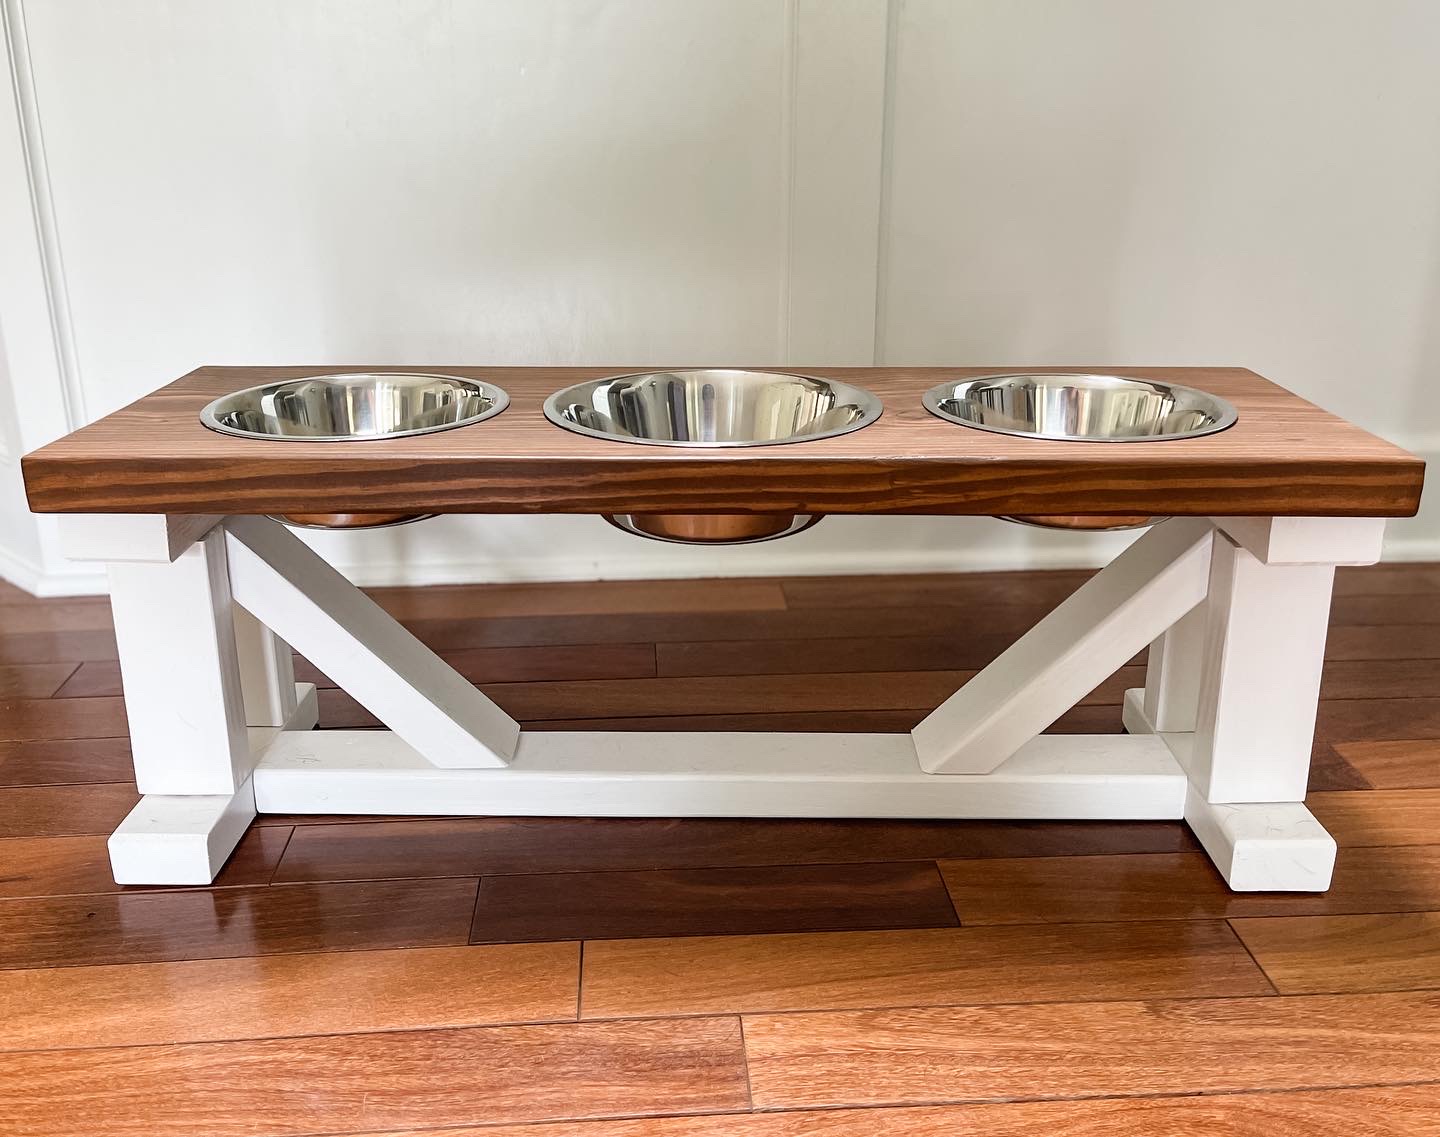 Handcrafted for Pets ELEVATED DOG FEEDER - Unfinished Pine Wood